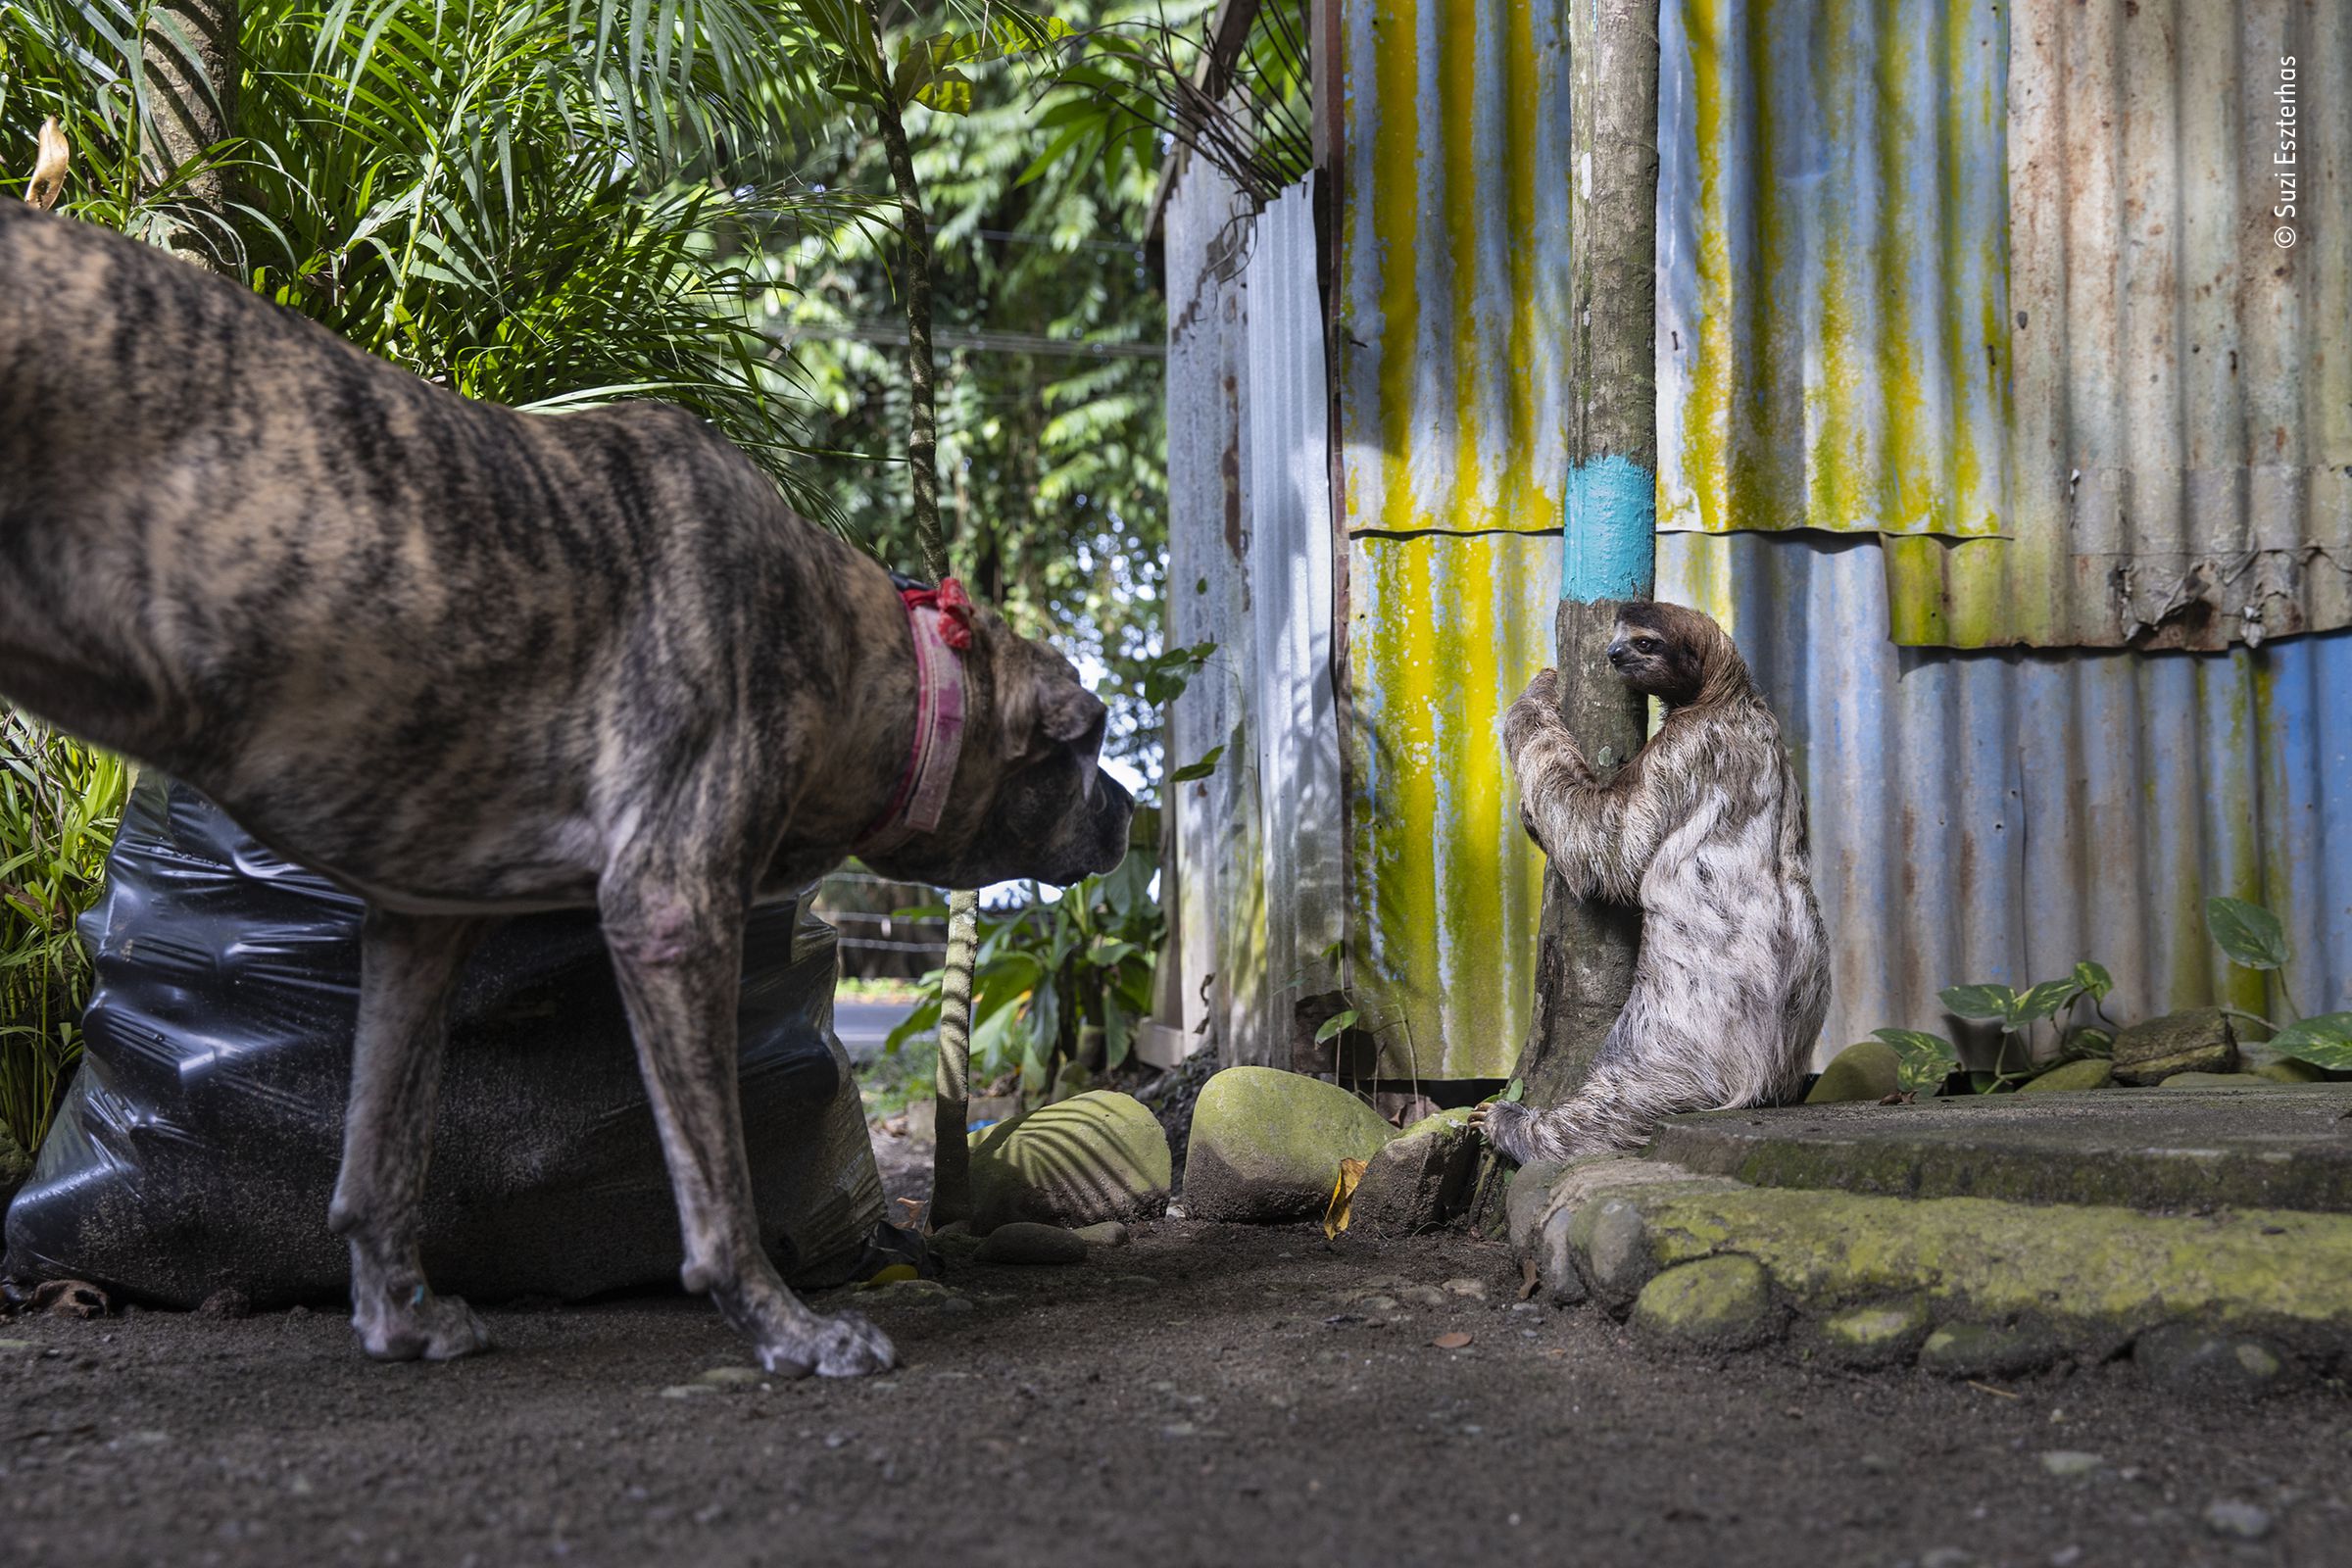 A dog looks at a sloth standing nearby hugging a tree trunk.